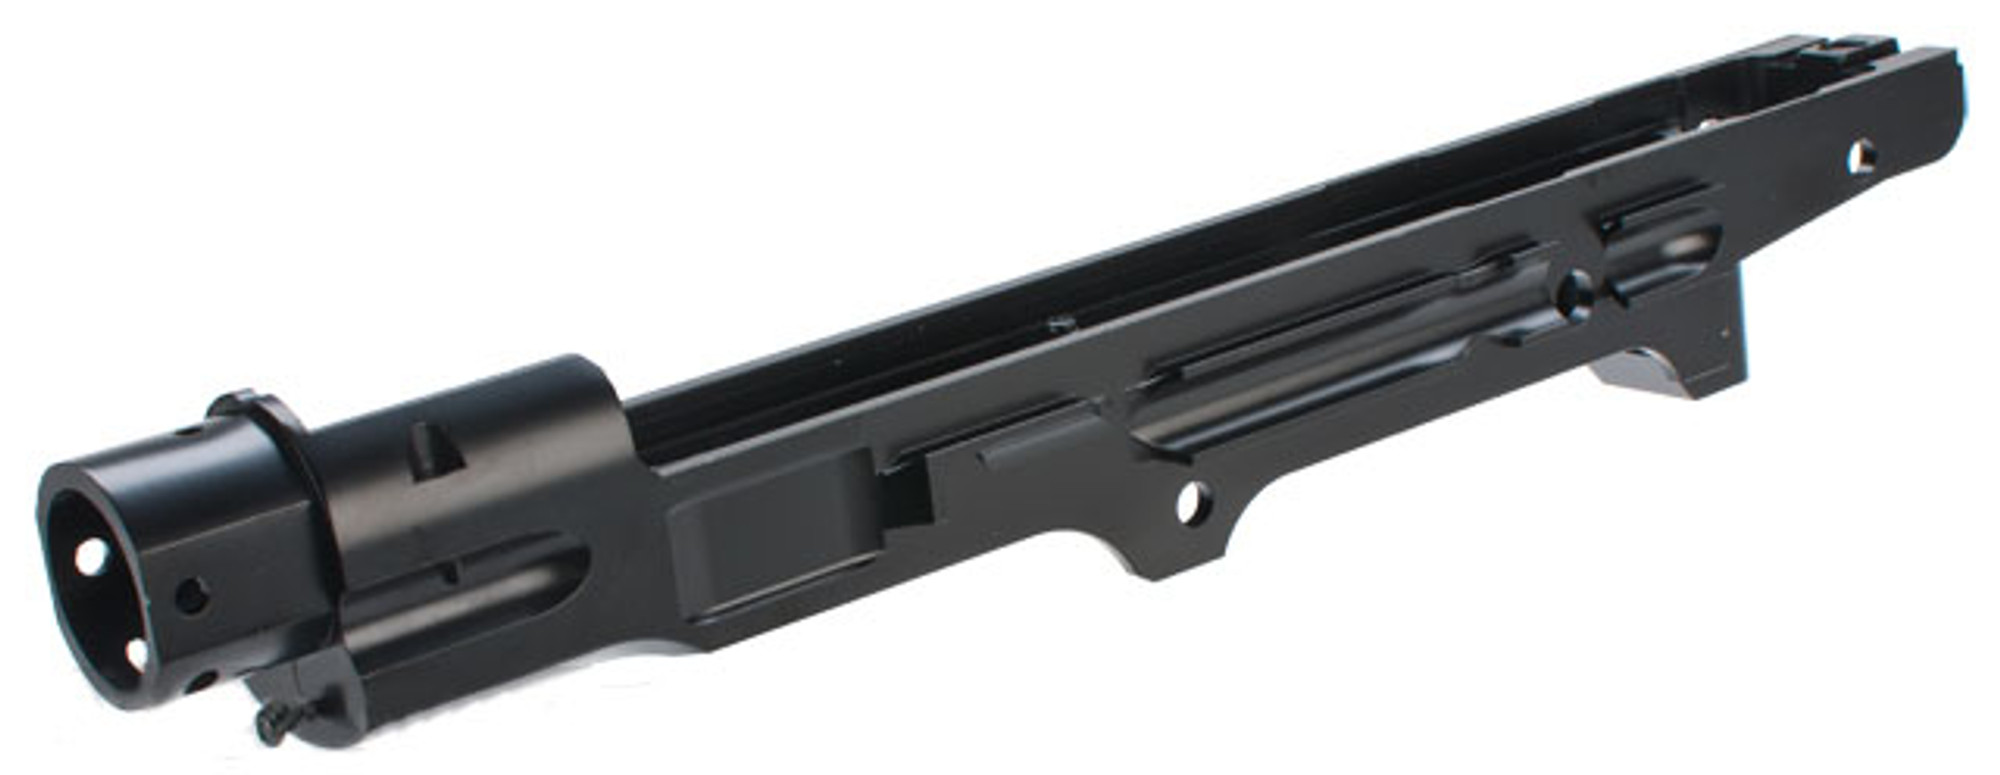 WE-Tech Lower Receiver for SVD Series Airsoft GBB Sniper Rifles